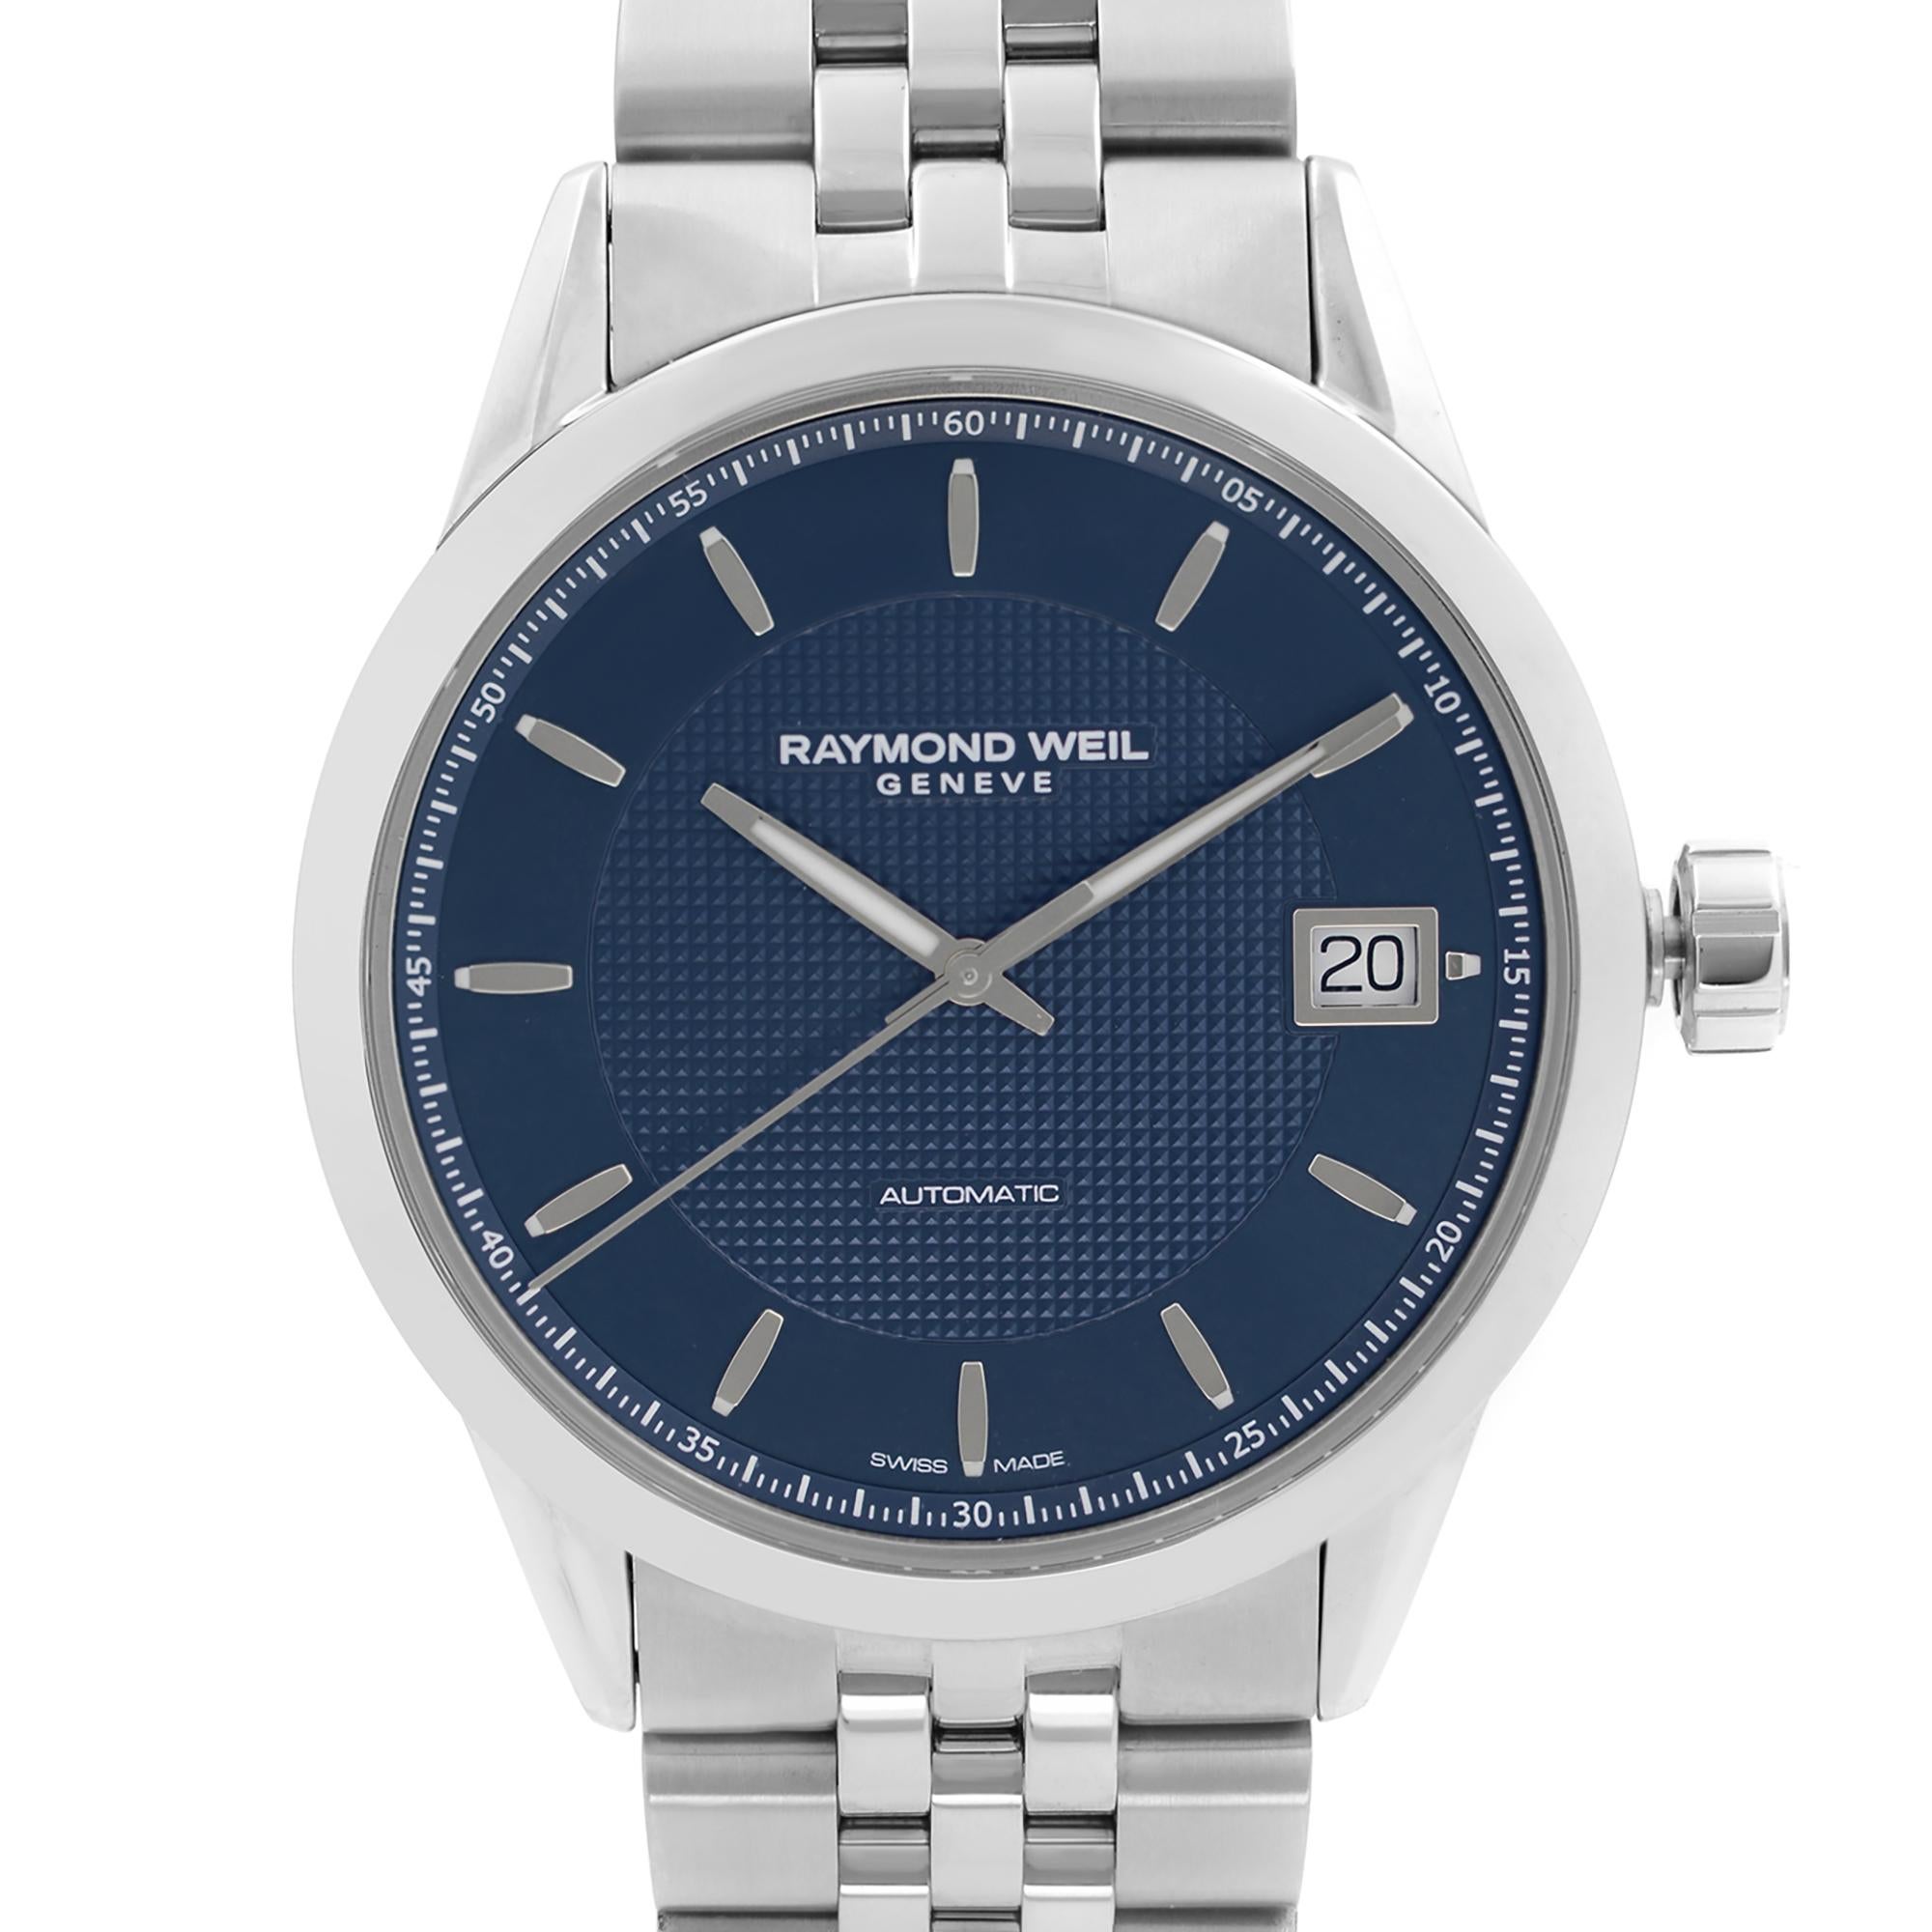 Never worn Raymond Weil Freelancer 42mm Steel Blue Dial Automatic Men's Watch 2740-ST-50021. This Beautiful Timepiece Features: Stainless Steel Case and Bracelet, Fixed Stainless Steel Bezel, Blue Dial with Luminous Silver-Tone Hands, And Index Hour